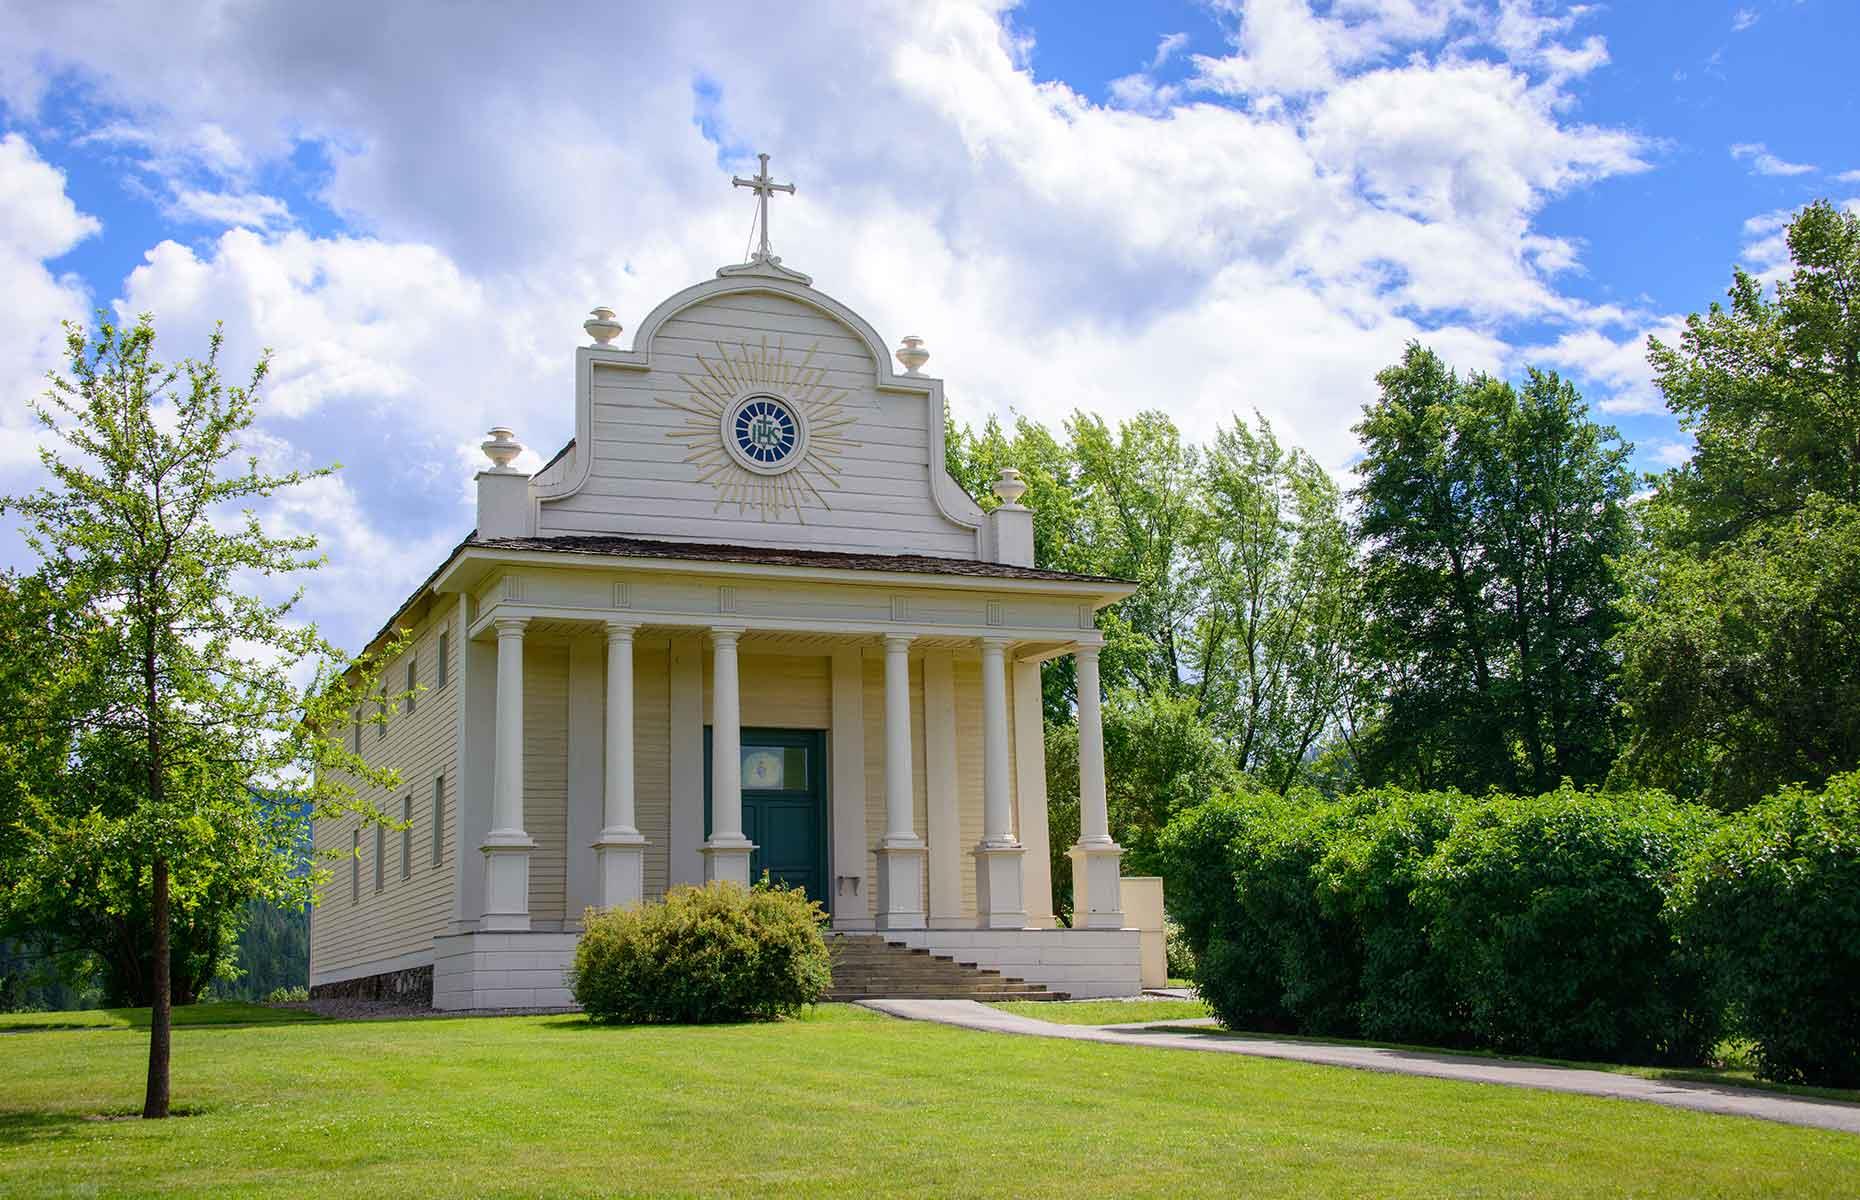 <p>The <a href="https://parksandrecreation.idaho.gov/parks/coeur-d-alenes-old-mission/">Mission of the Sacred Heart</a> is as significant today as it was when it was built, between 1850 and 1853. Italian Catholic missionaries and members of the Coeur d’Alene Native American tribe constructed the church <a href="https://nativeamerica.travel/listings/old-mission-state-park">without using nails</a>, used tin cans for chandeliers and formed walls using <a href="https://www.intermountainhistories.org/items/show/172">grass, straw and mud</a>. While it was heavily reconstructed in 1975, visitors today have the chance to explore the building, visitor center and the rest of the Old Mission State Park.</p>  <p><a href="https://www.loveexploring.com/gallerylist/87937/incredible-ancient-ruins-in-the-usa-you-probably-didnt-know-existed"><strong>Check out these ancient ruins in the US</strong></a></p>